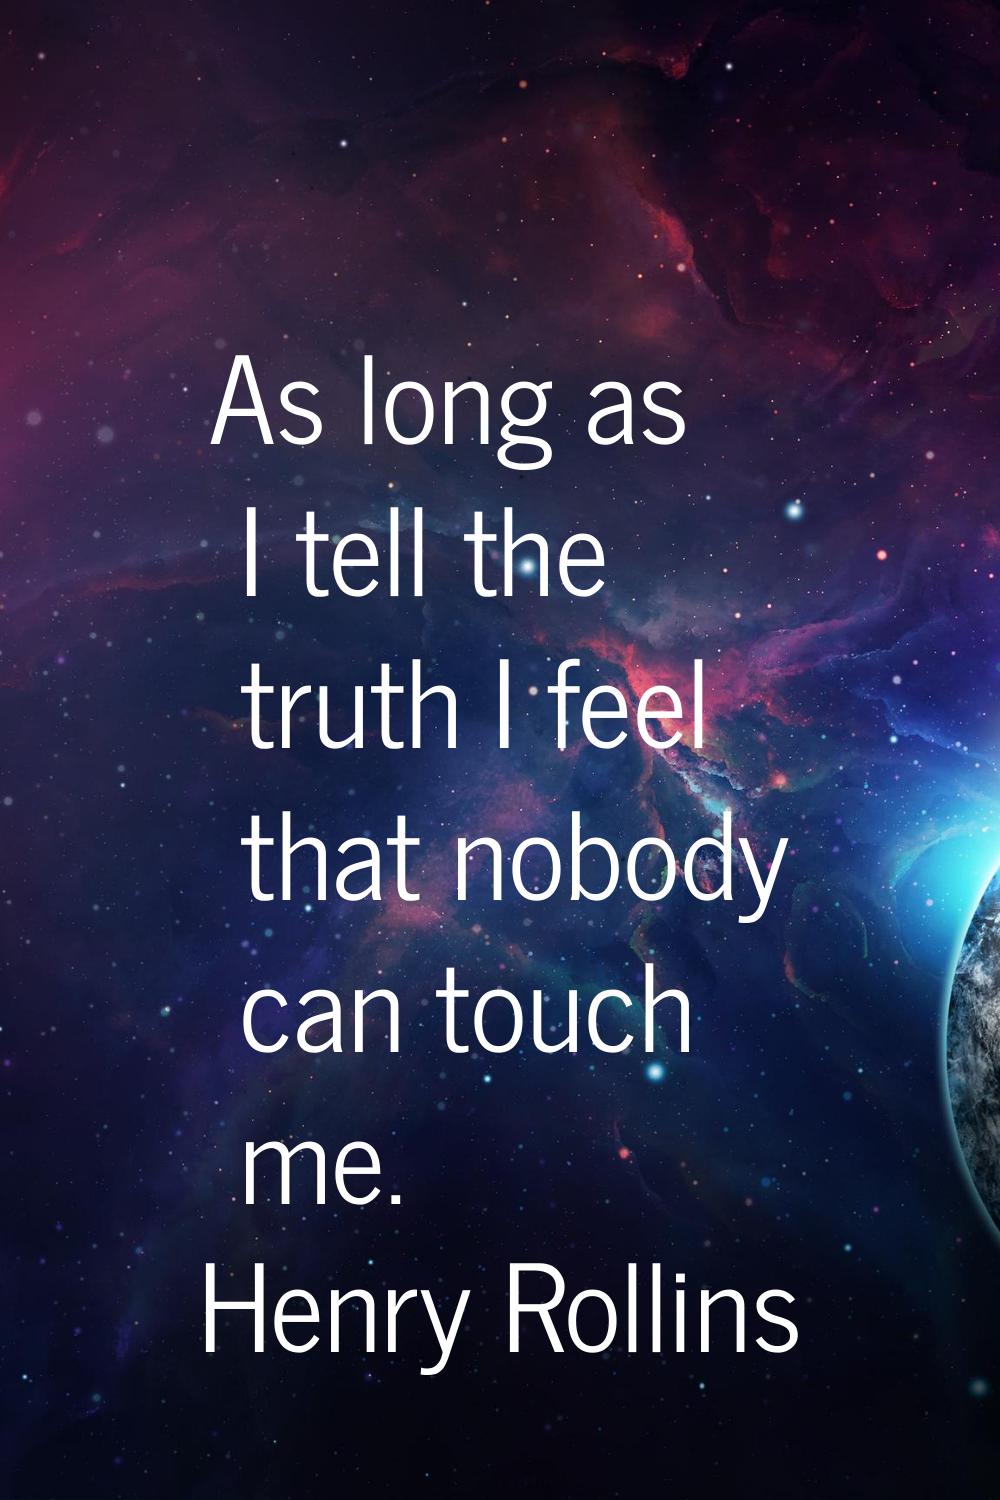 As long as I tell the truth I feel that nobody can touch me.